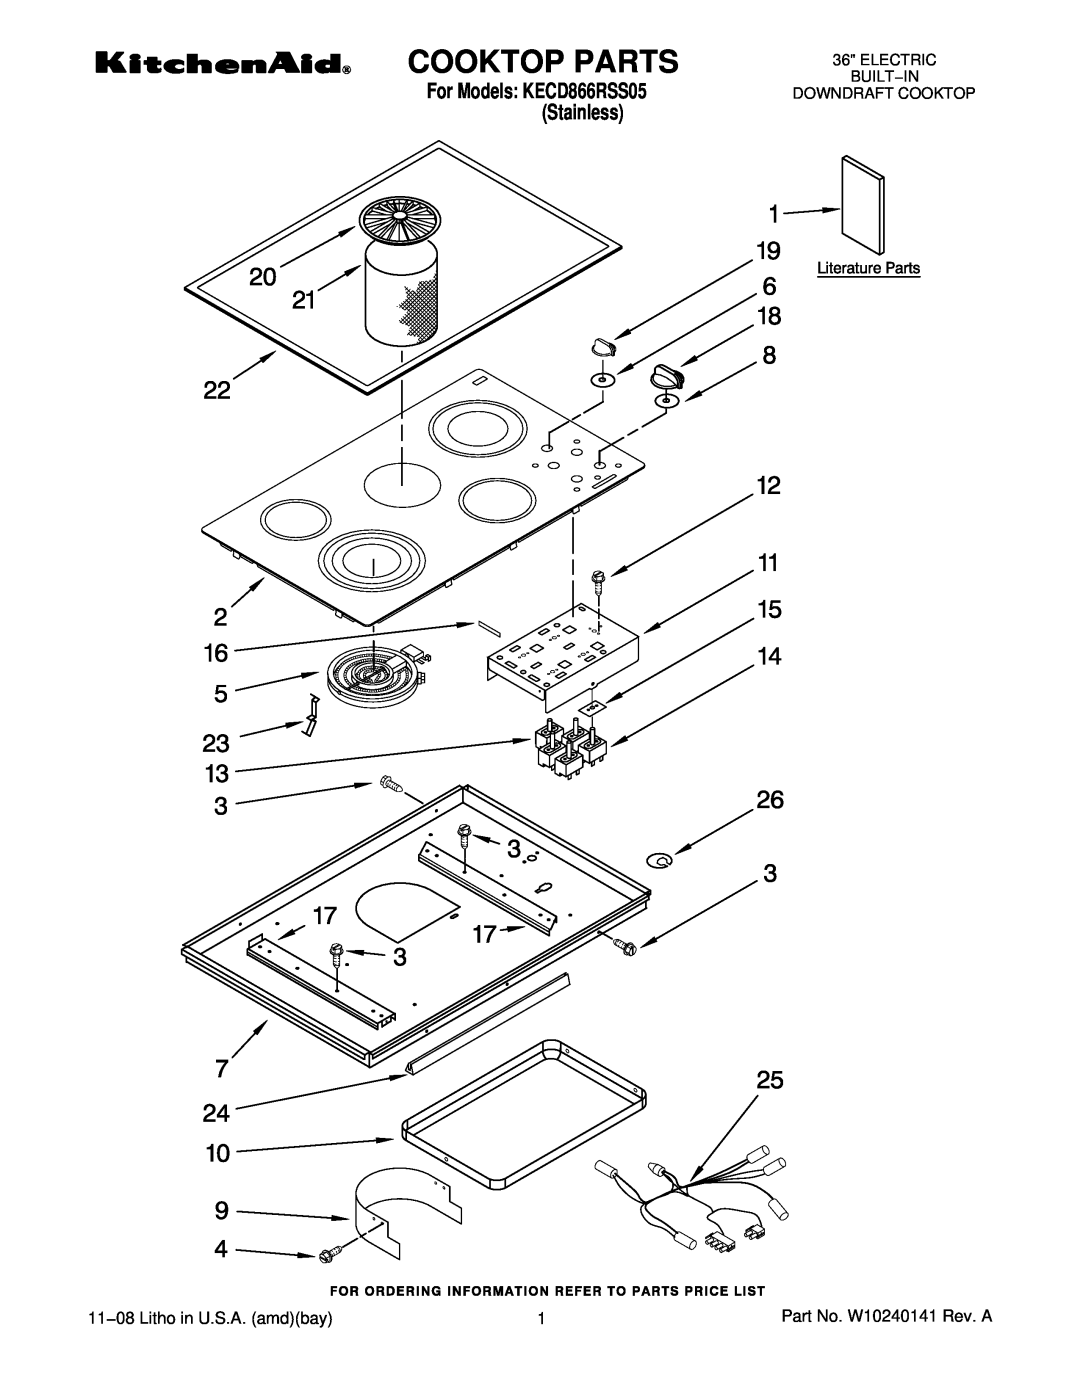 KitchenAid manual Cooktop Parts, 11−08 Litho in U.S.A. amdbay, For Models KECD866RSS05 Stainless 